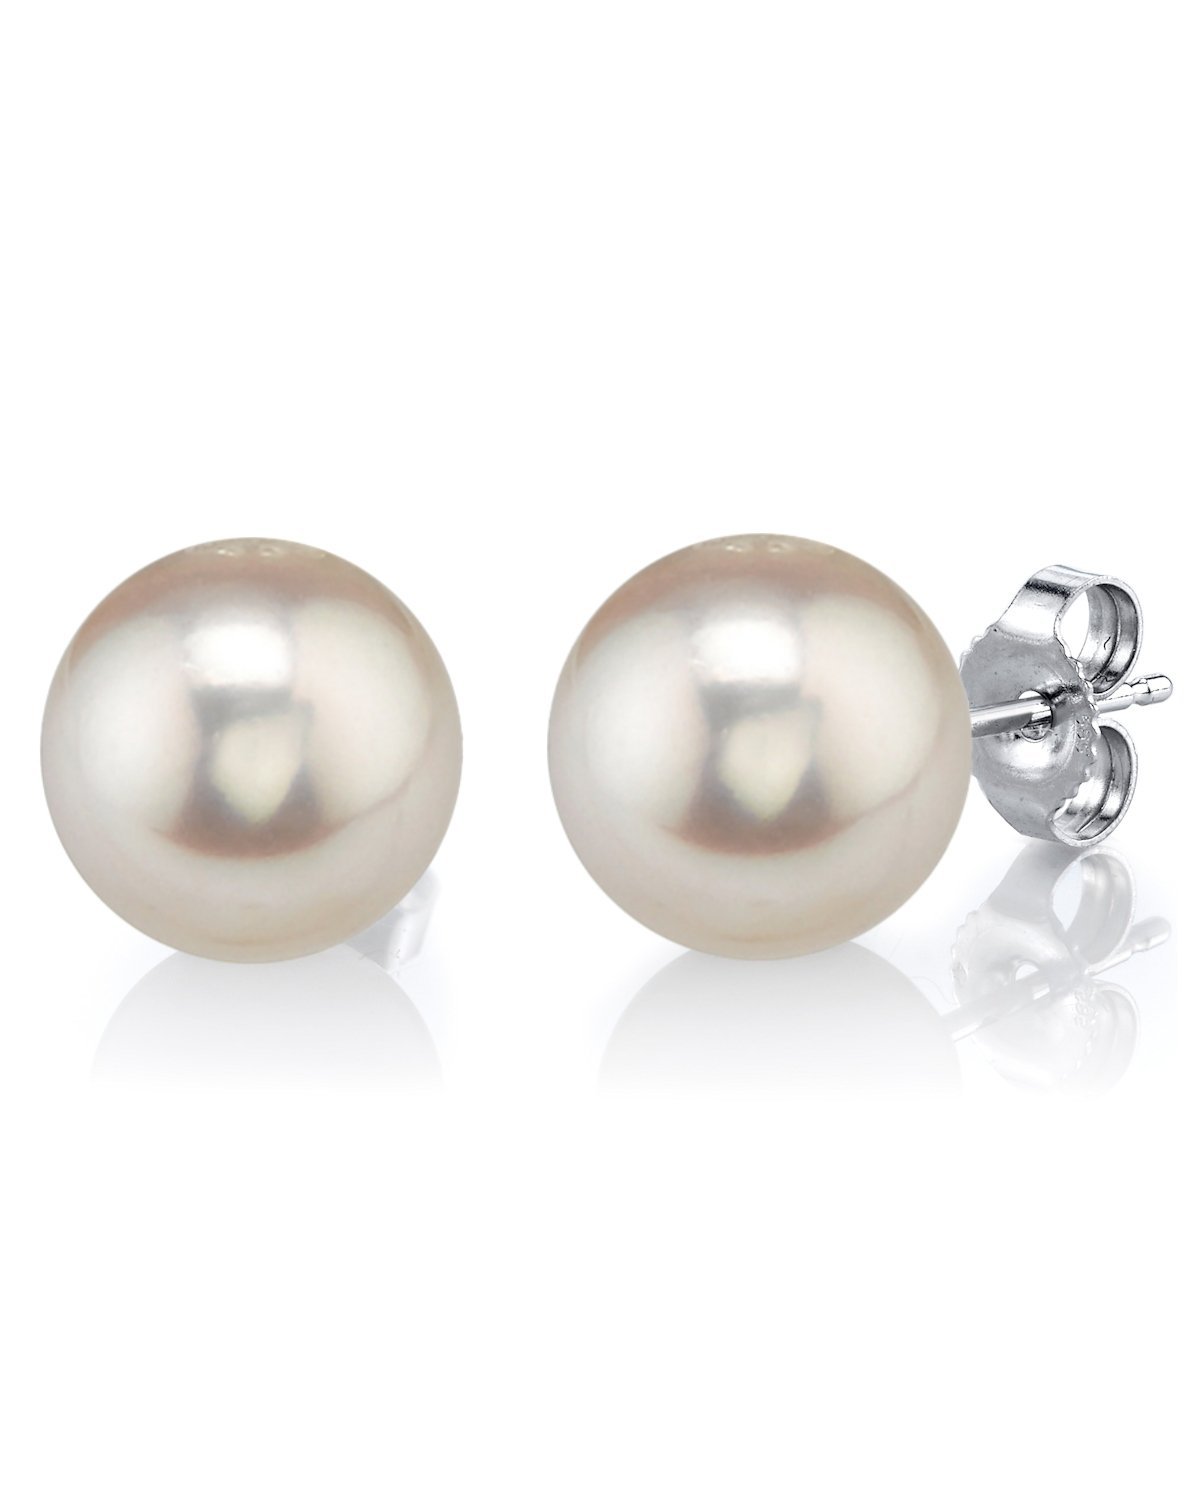 12mm White Freshwater Round Pearl Stud Earrings - AAAA Quality